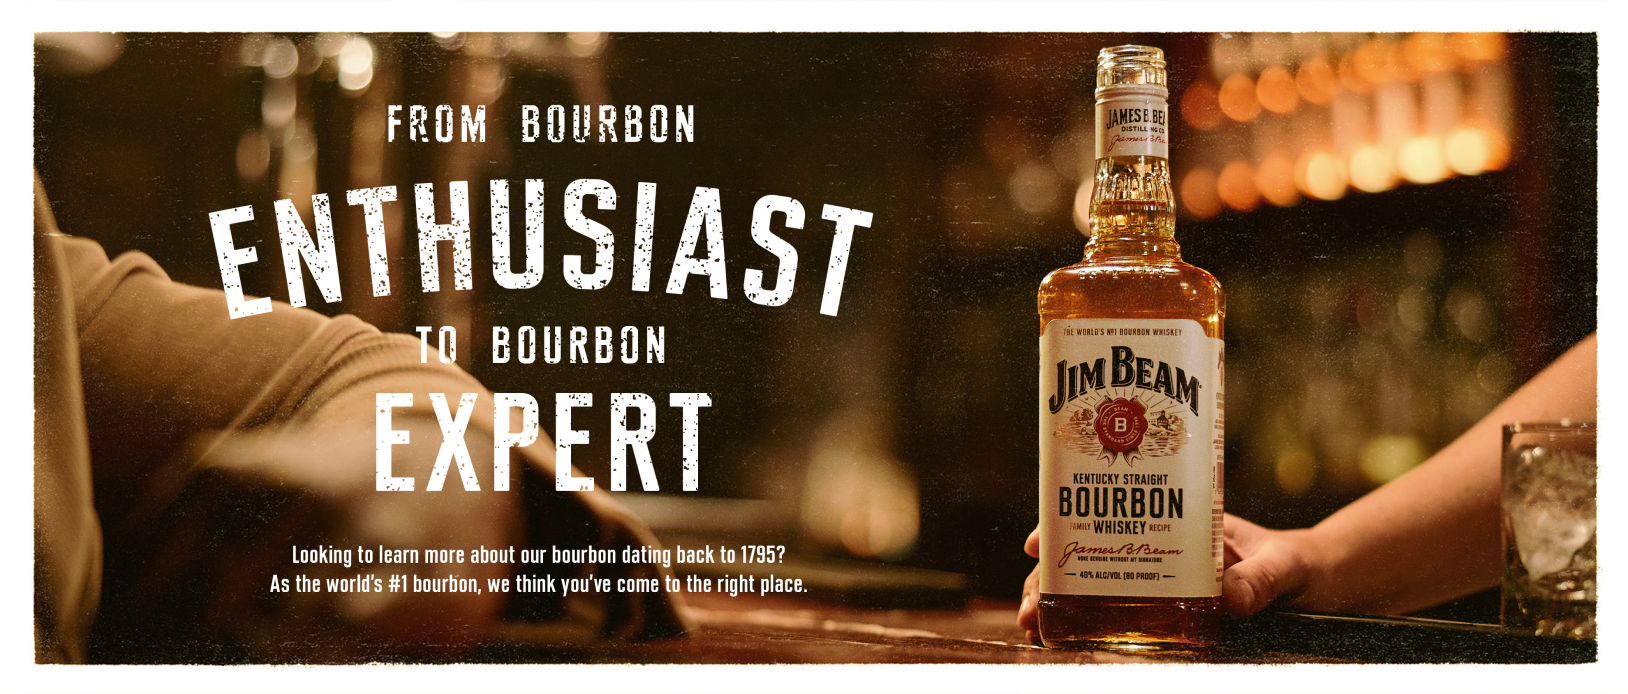 Behind the Bourbon banner Image